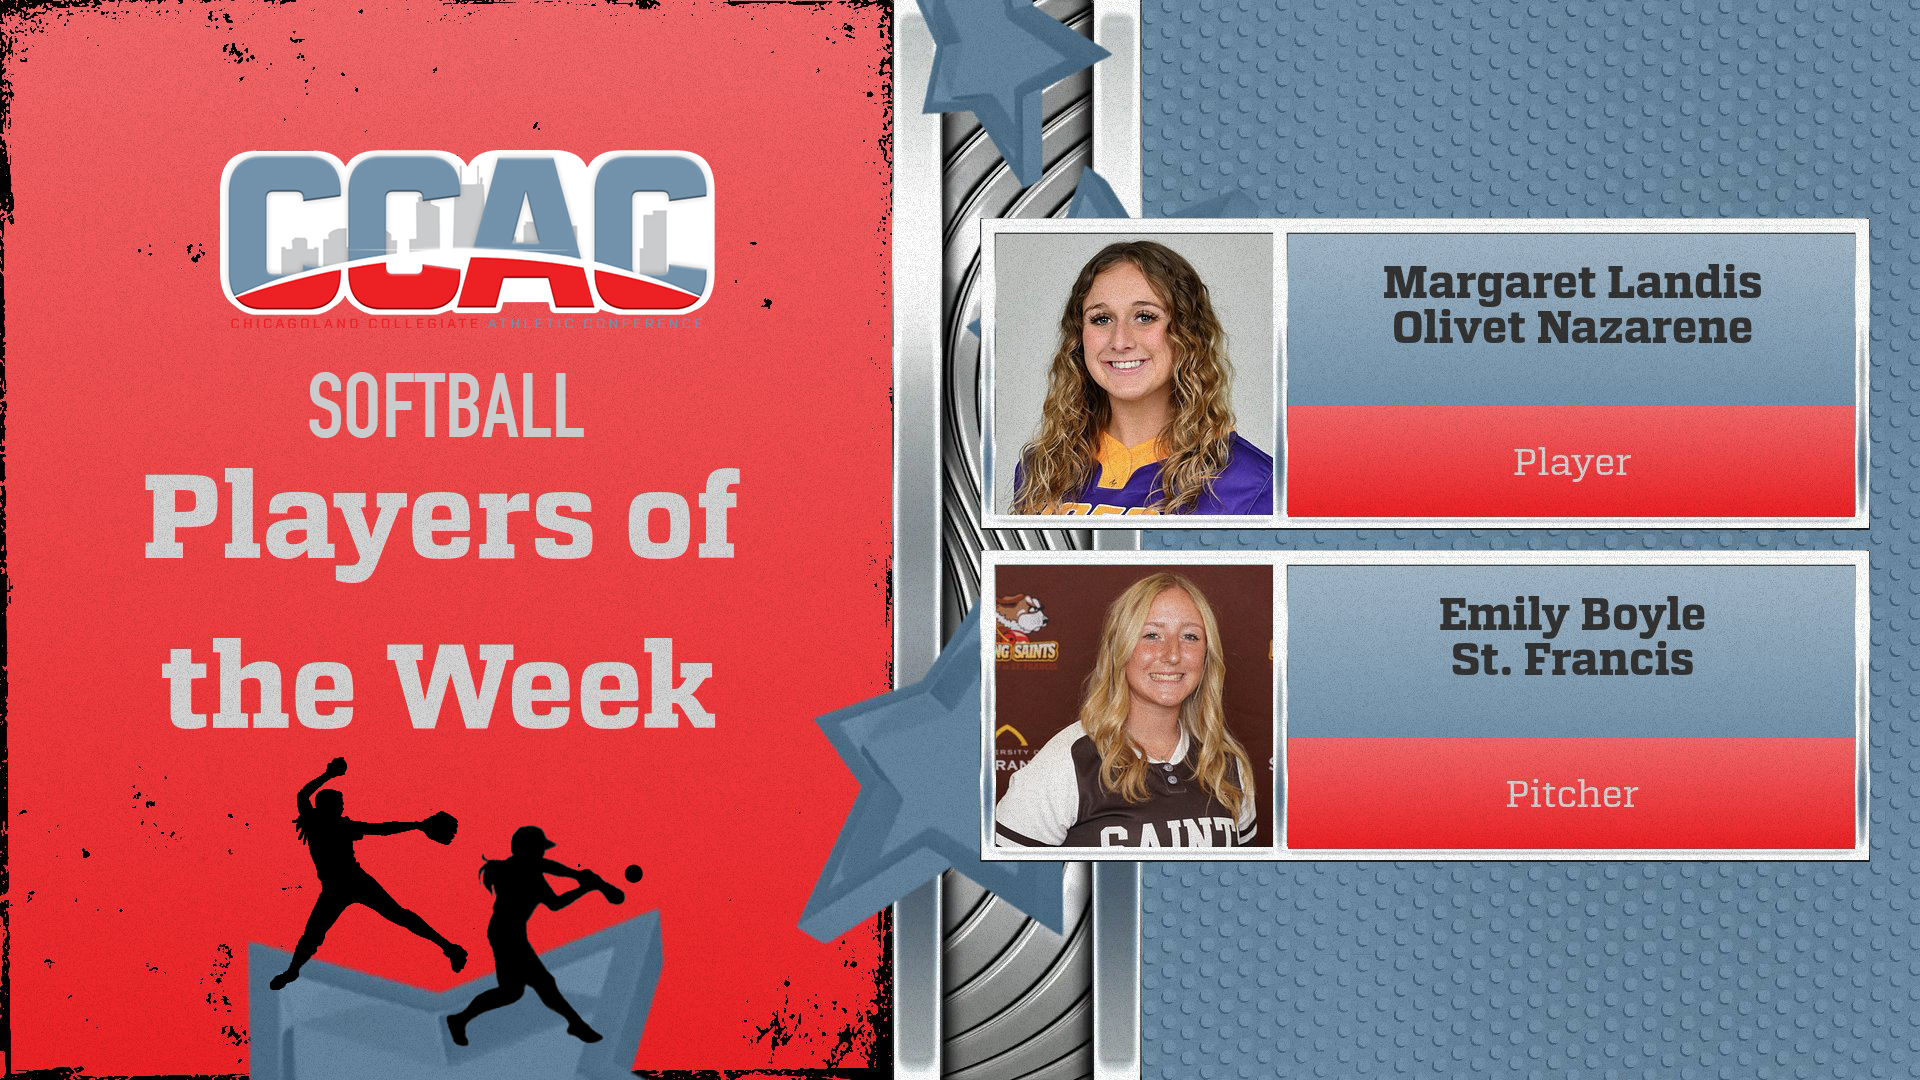 ONU's Landis, USF's Boyle Earn Latest Round of Weekly Softball Recognition